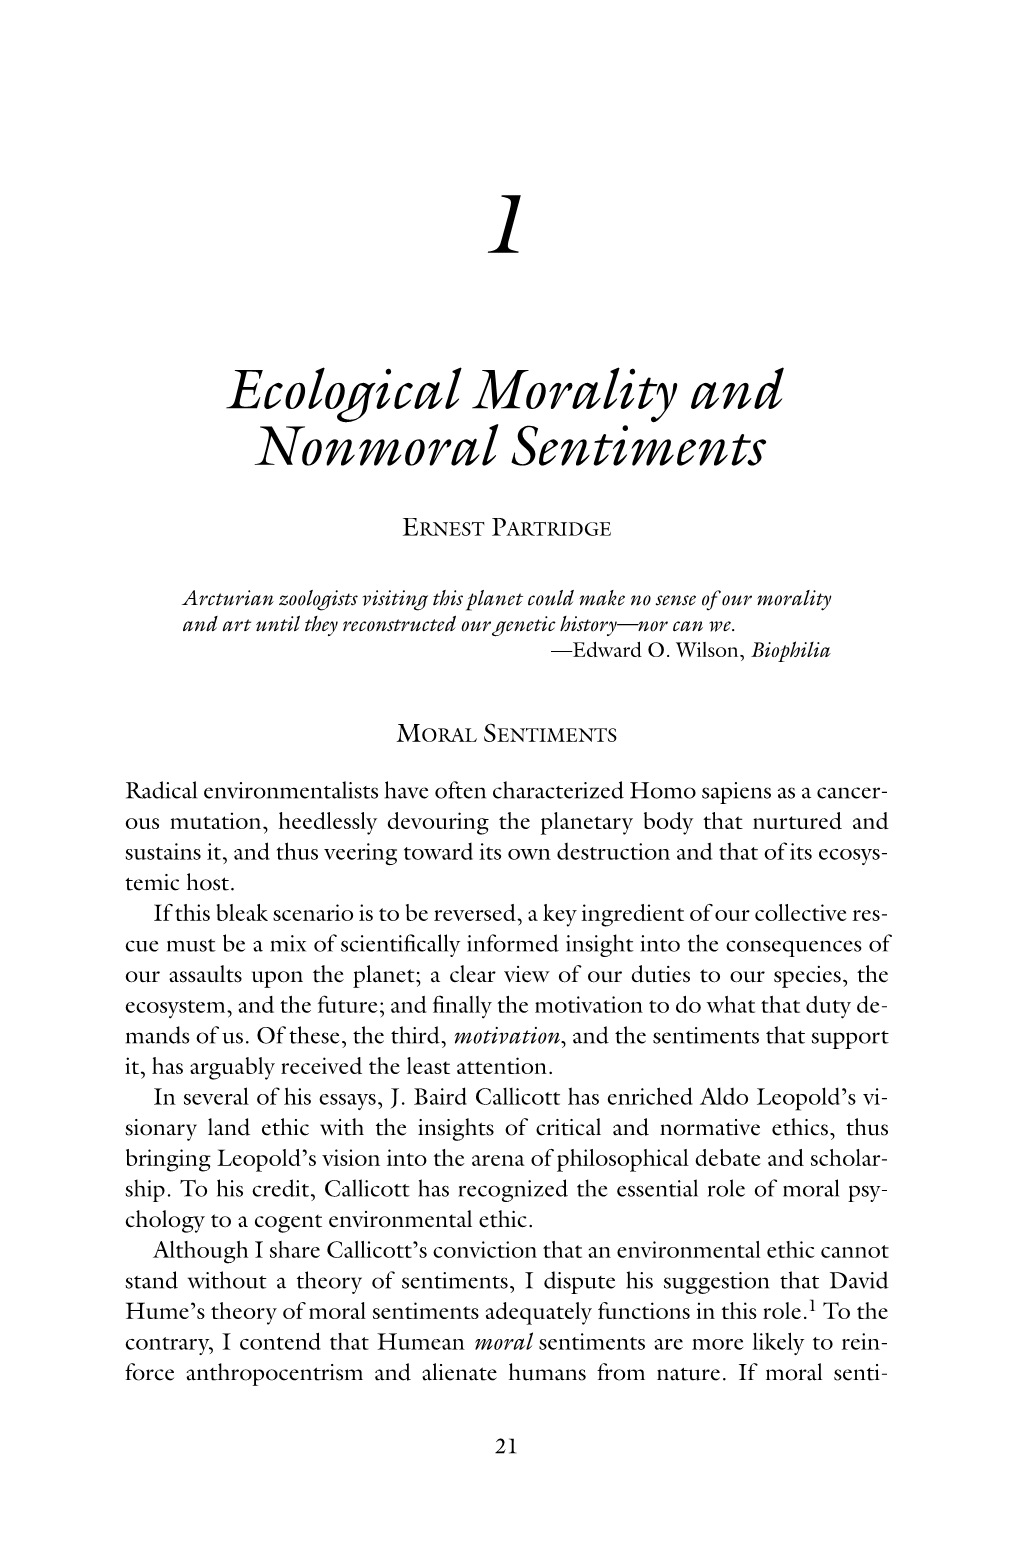 Ecological Morality and Nonmoral Sentiments